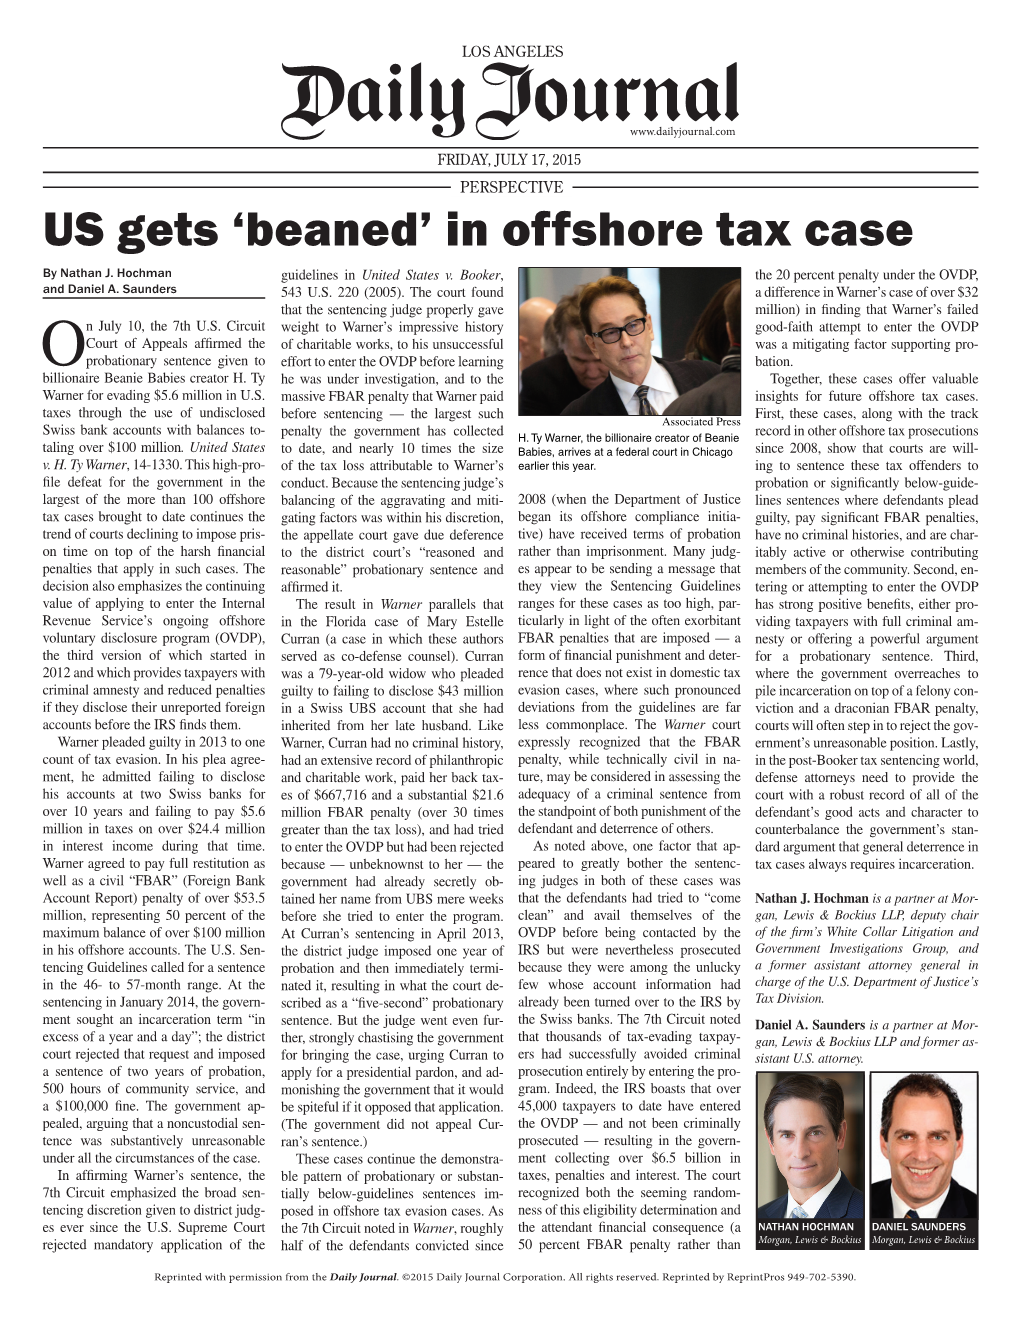 In Offshore Tax Case by Nathan J